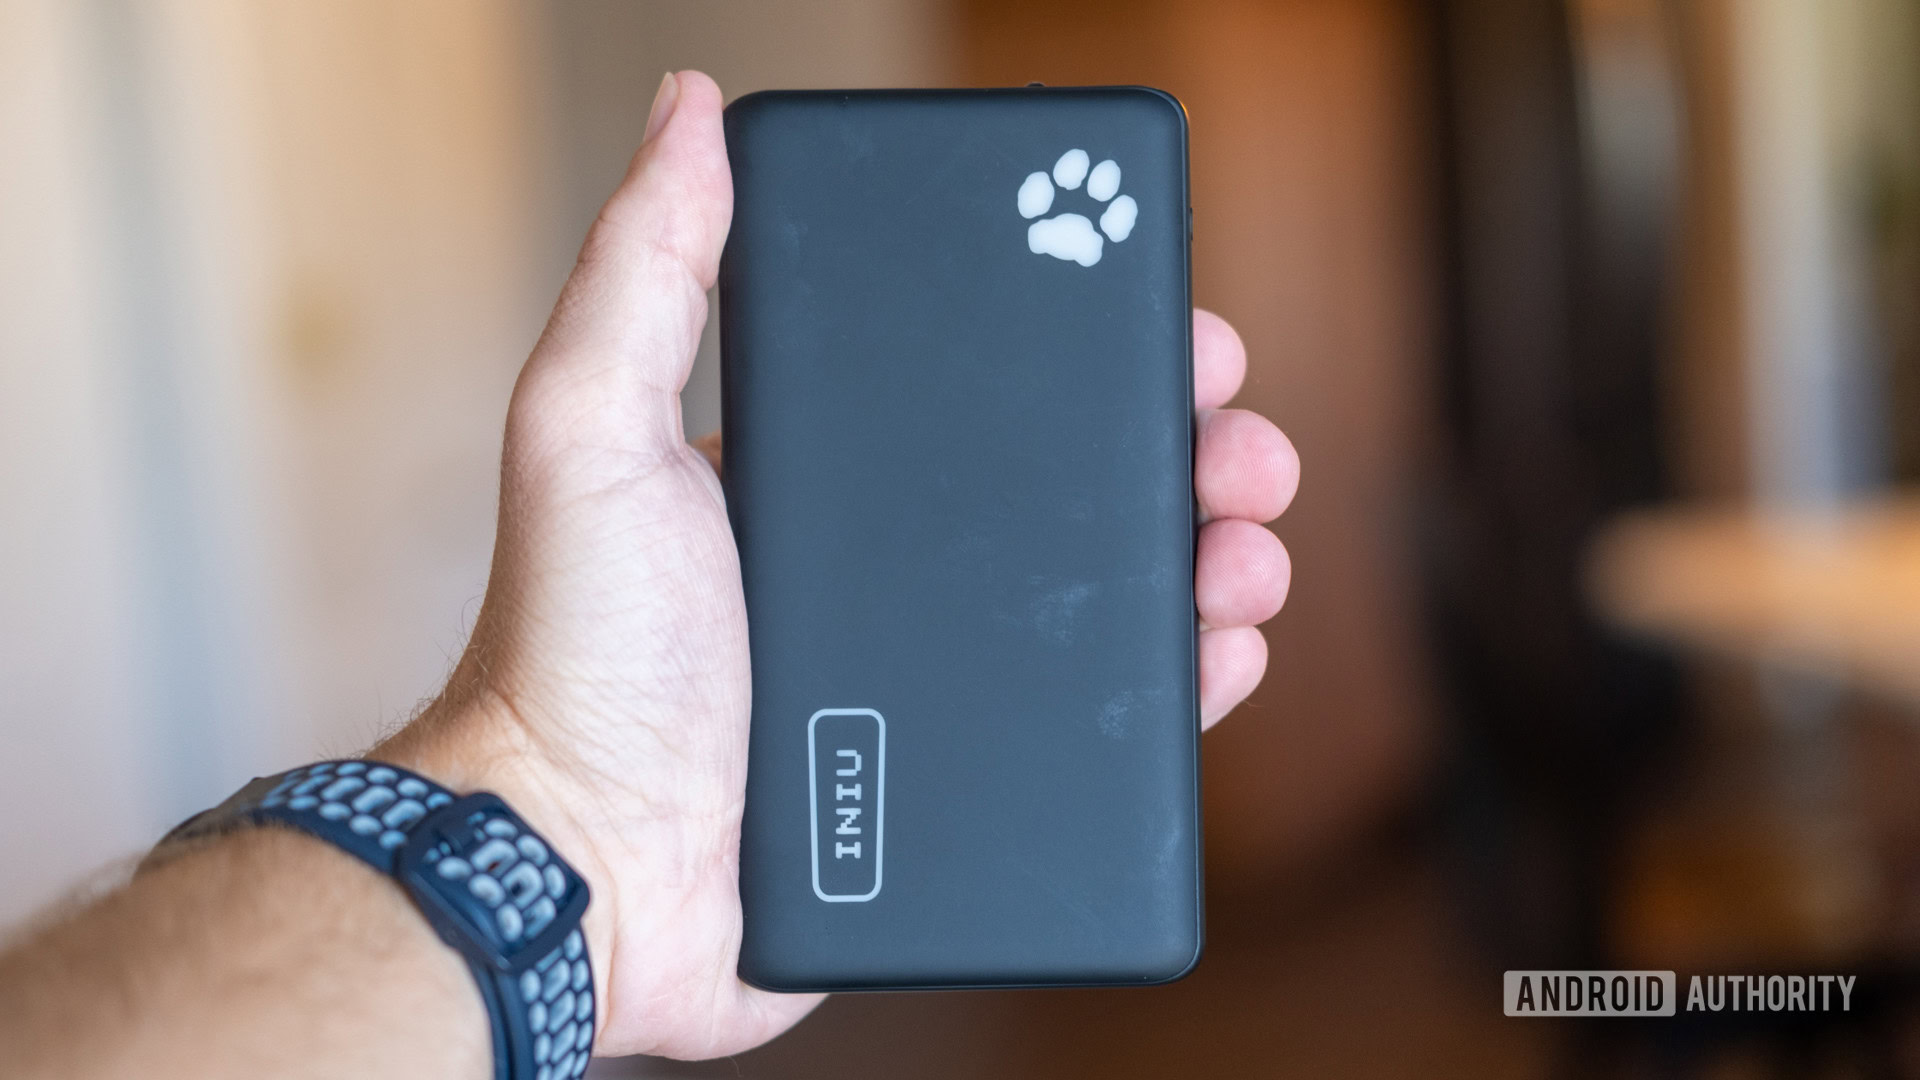 The INIU power bank in hand